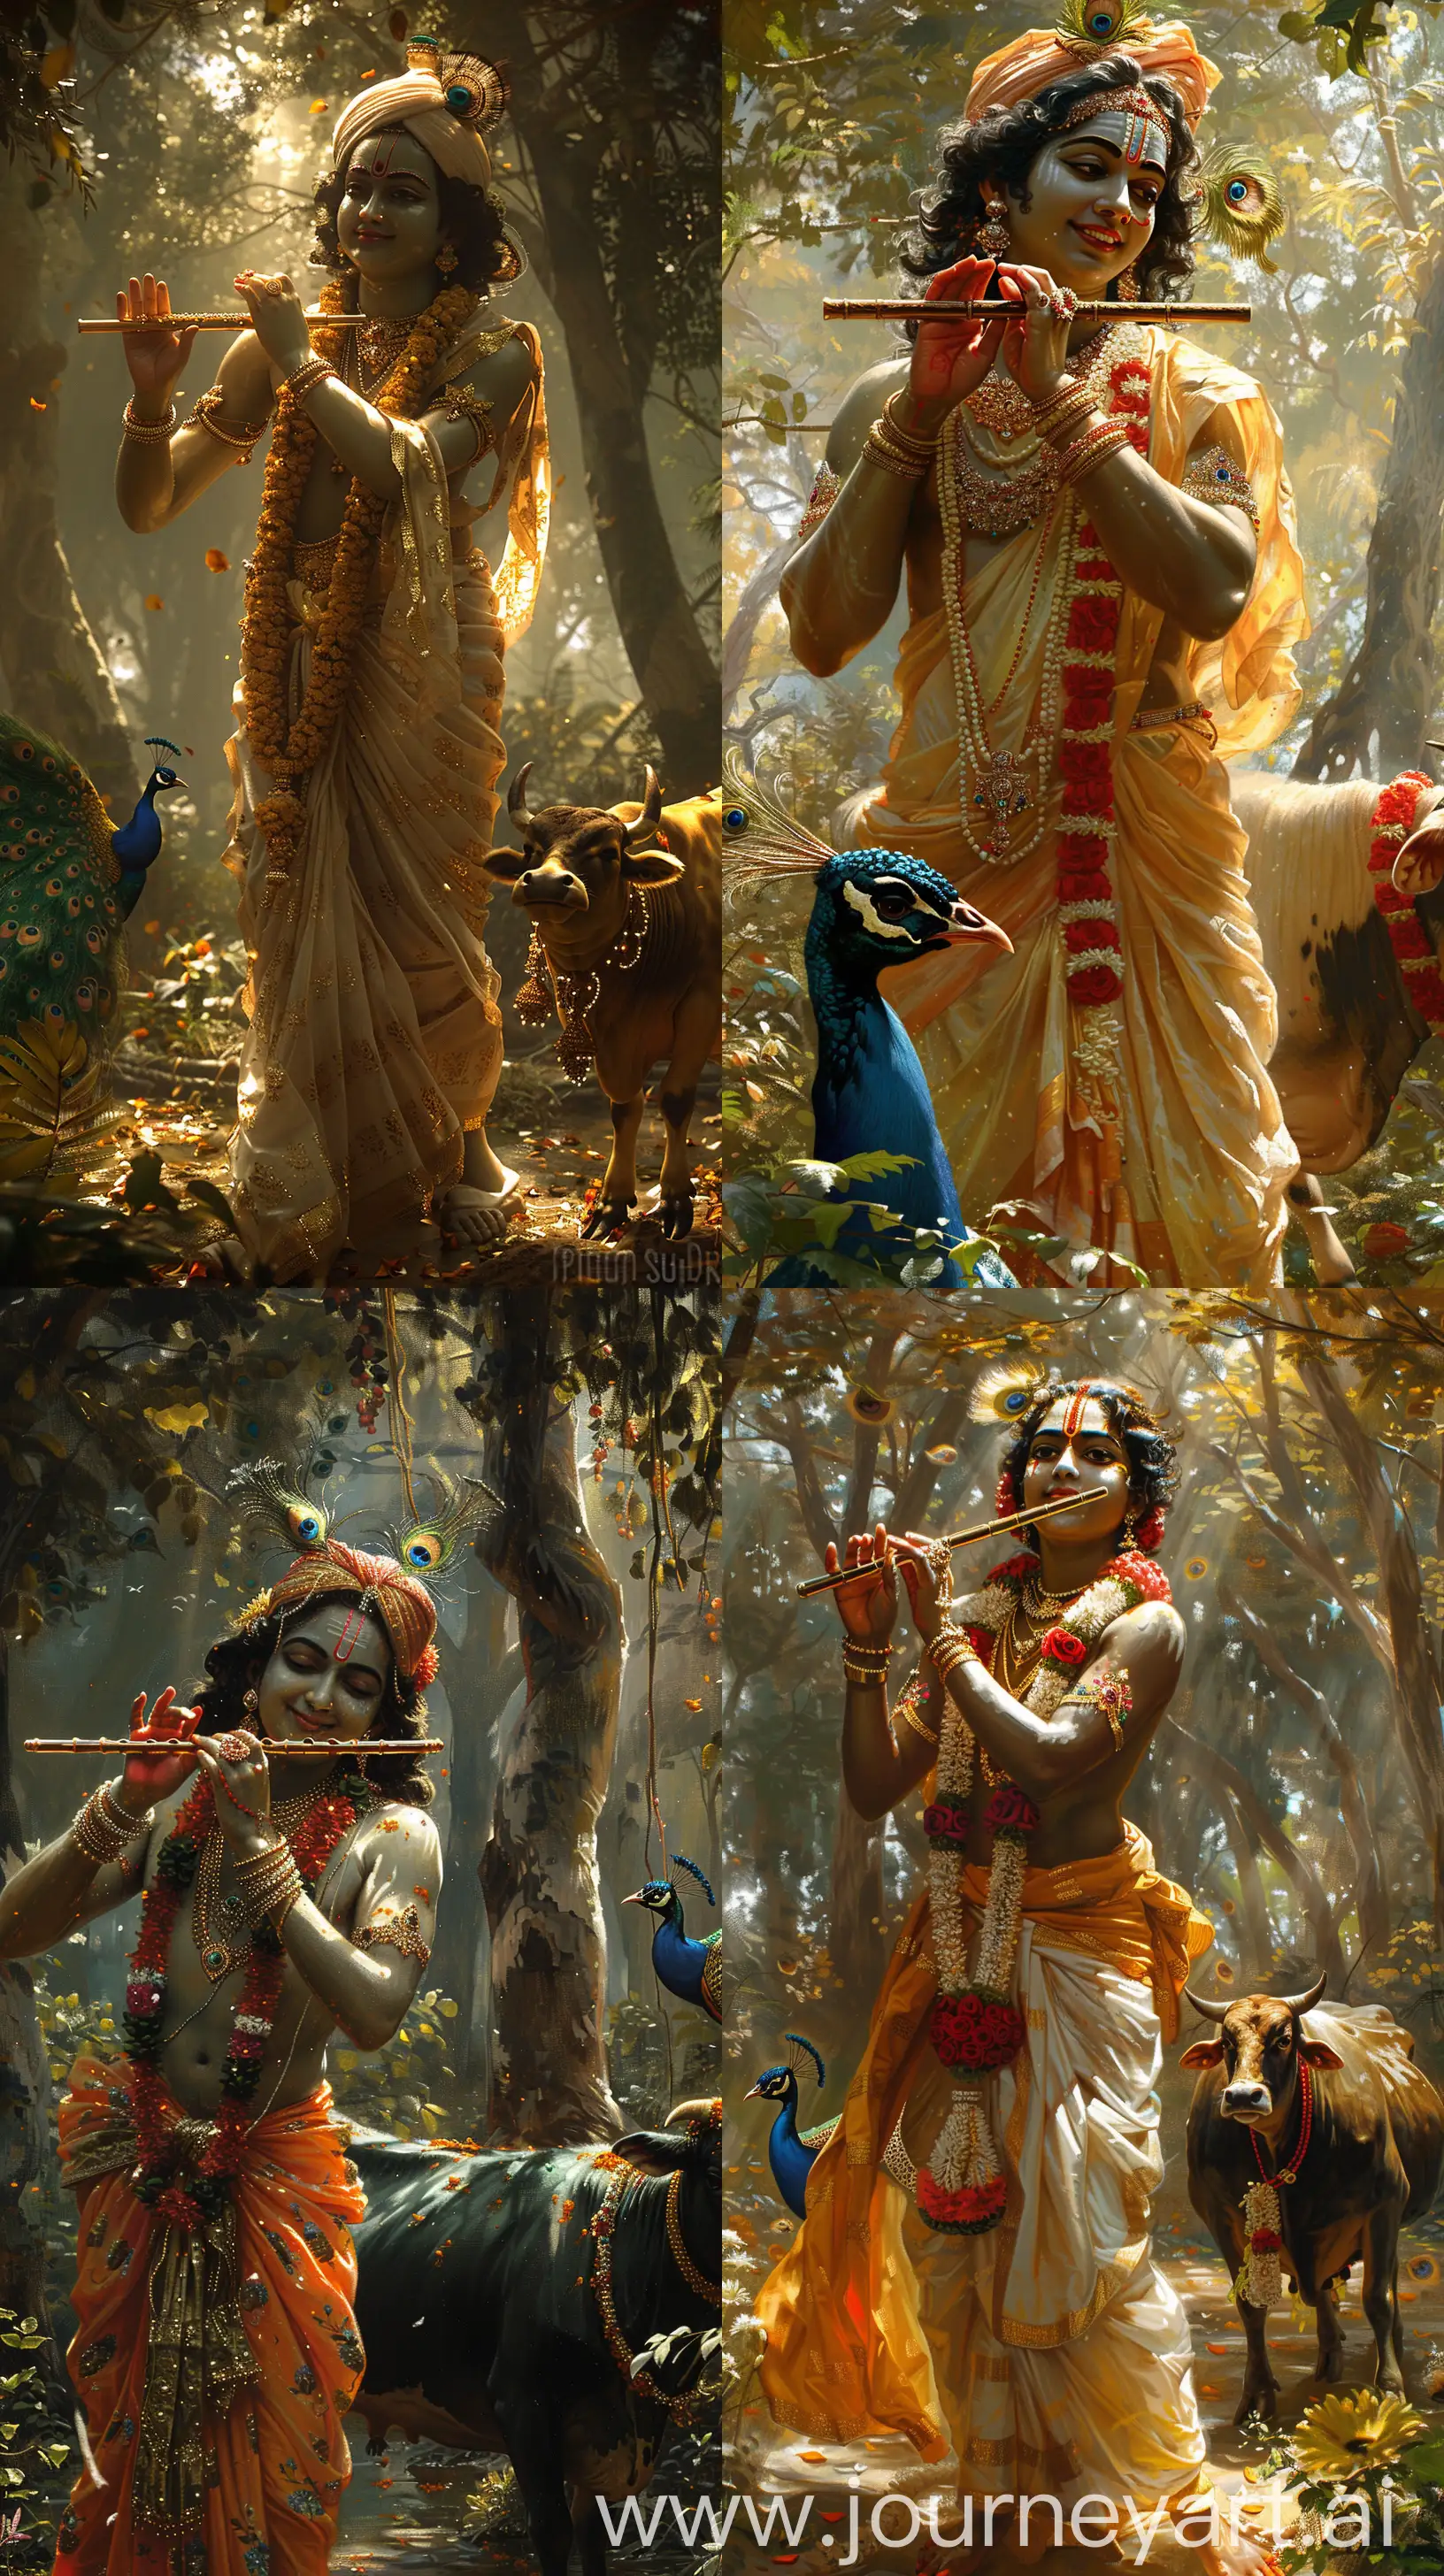 Divine-Lord-Krishna-Playing-Flute-with-Sacred-Cow-in-Tranquil-Forest